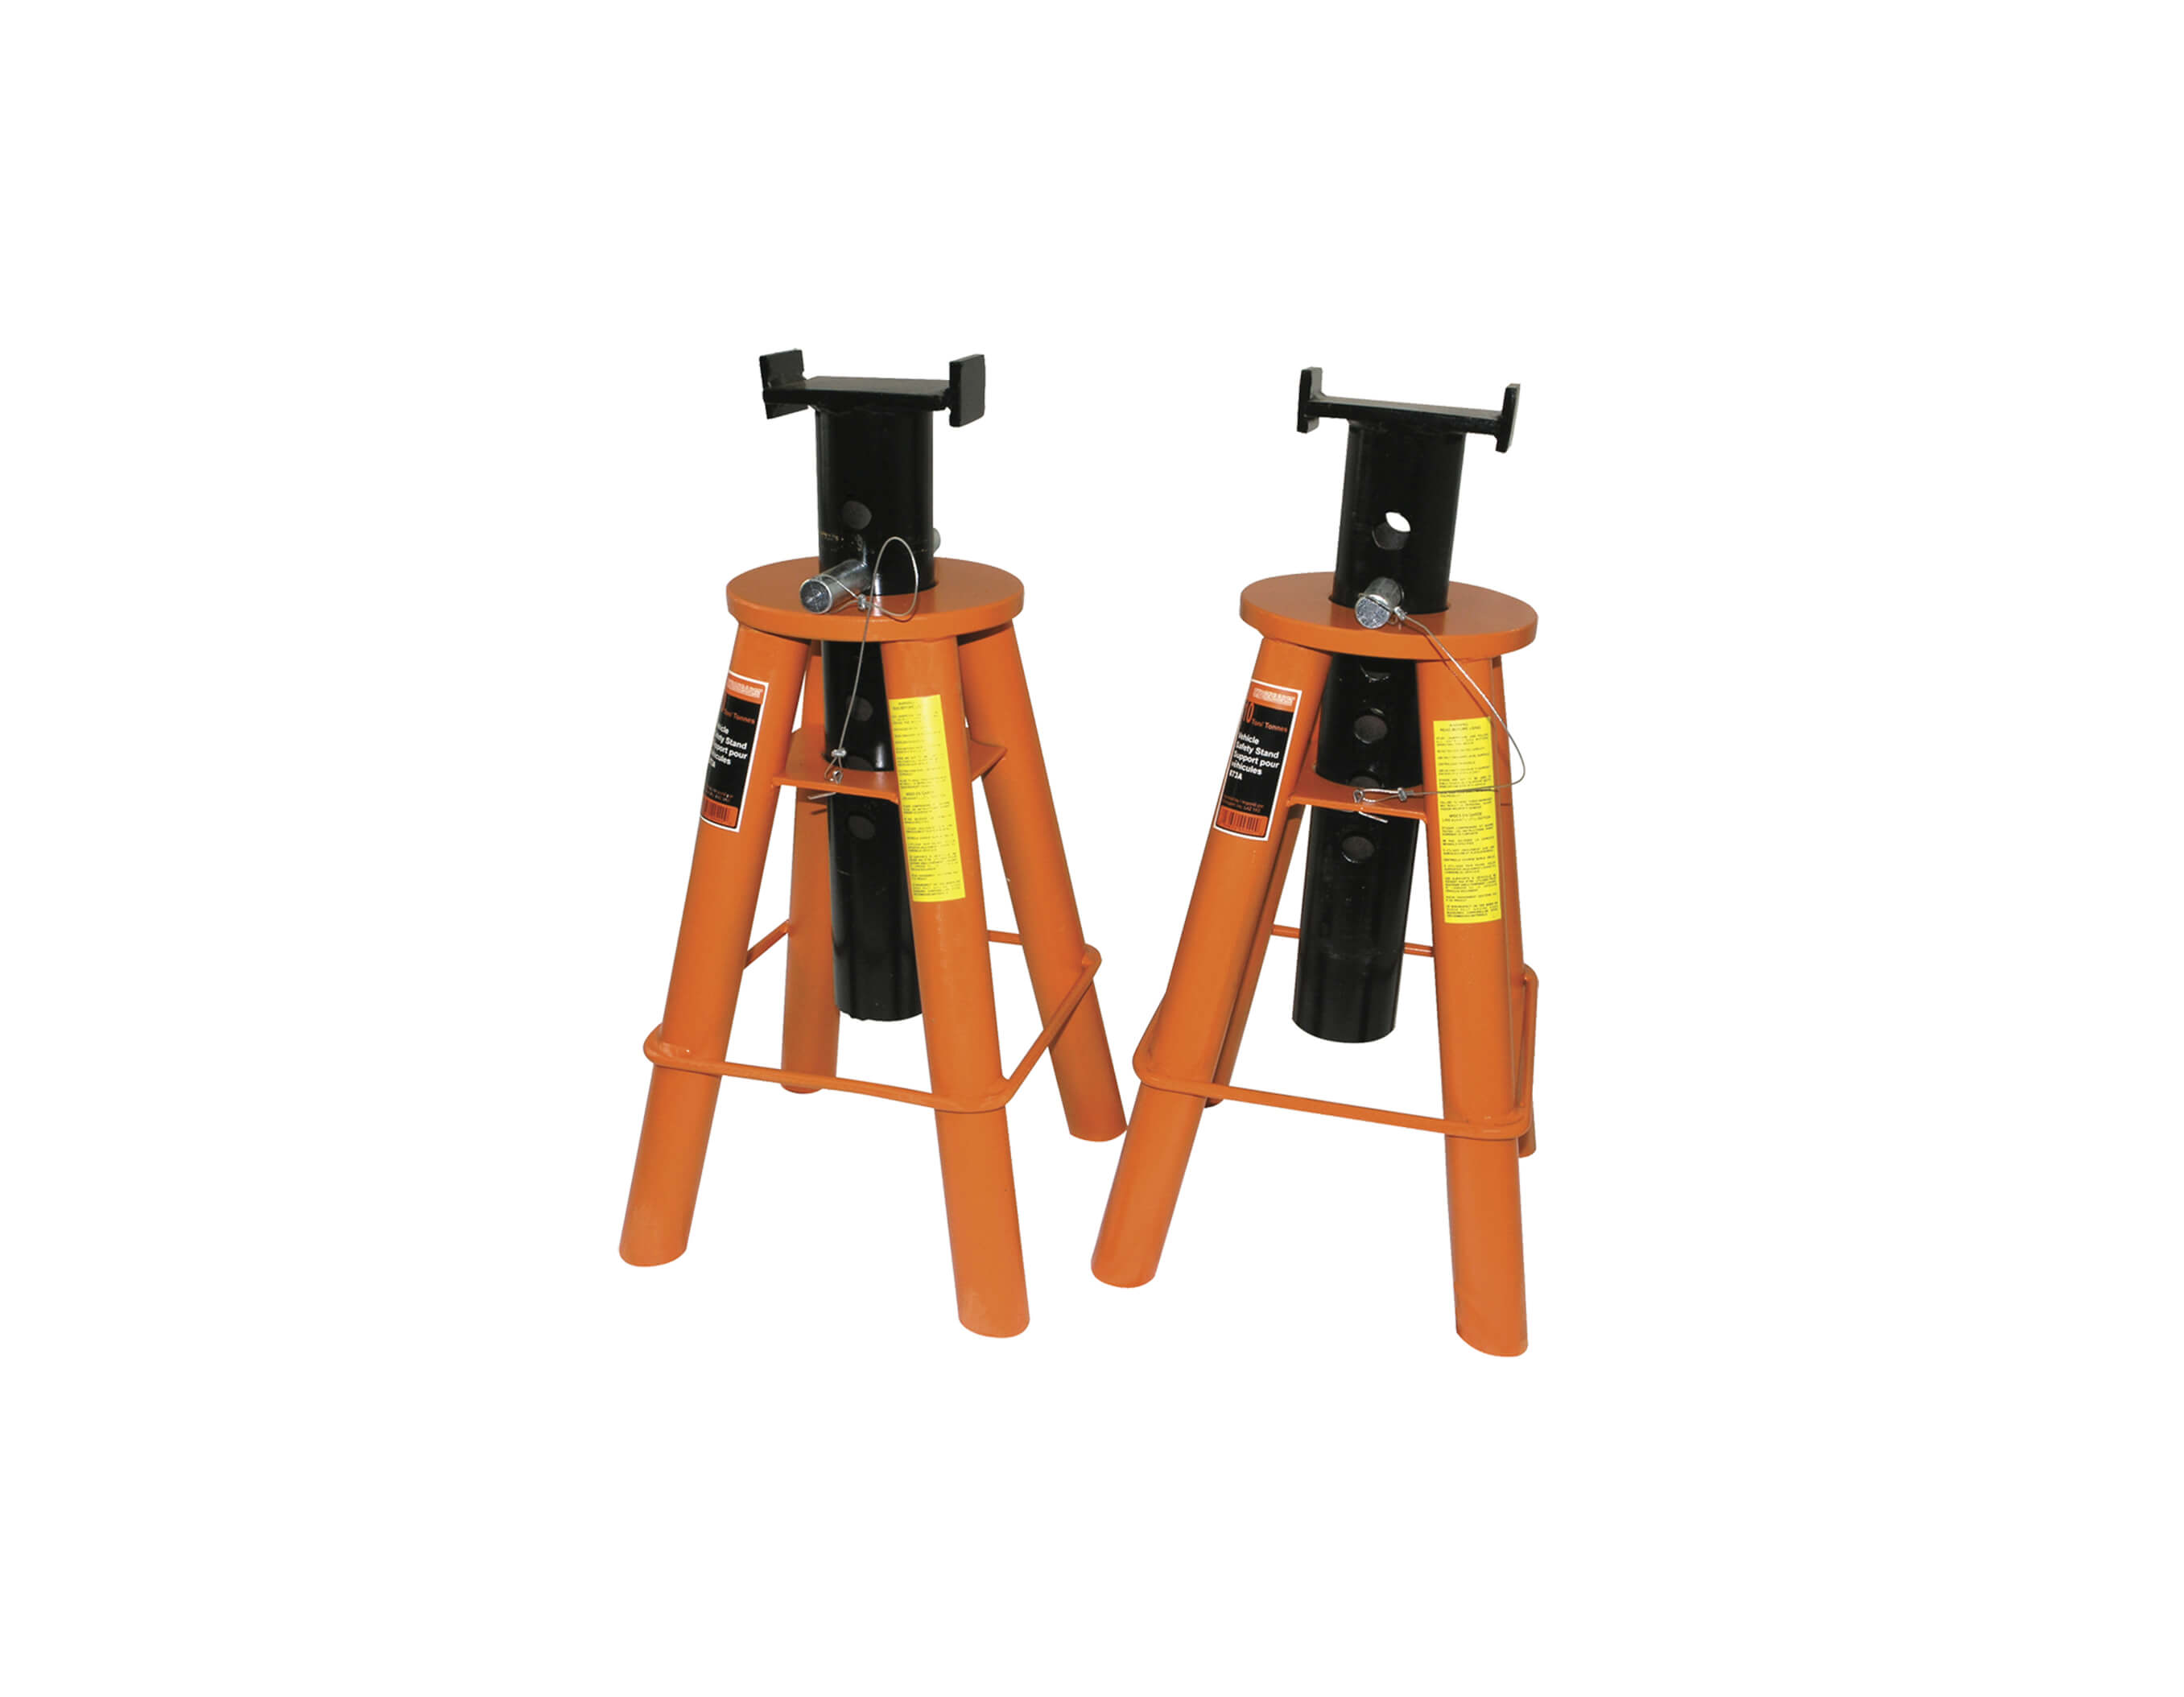 10T LOW PROFILE JACK STANDS (PAIR)